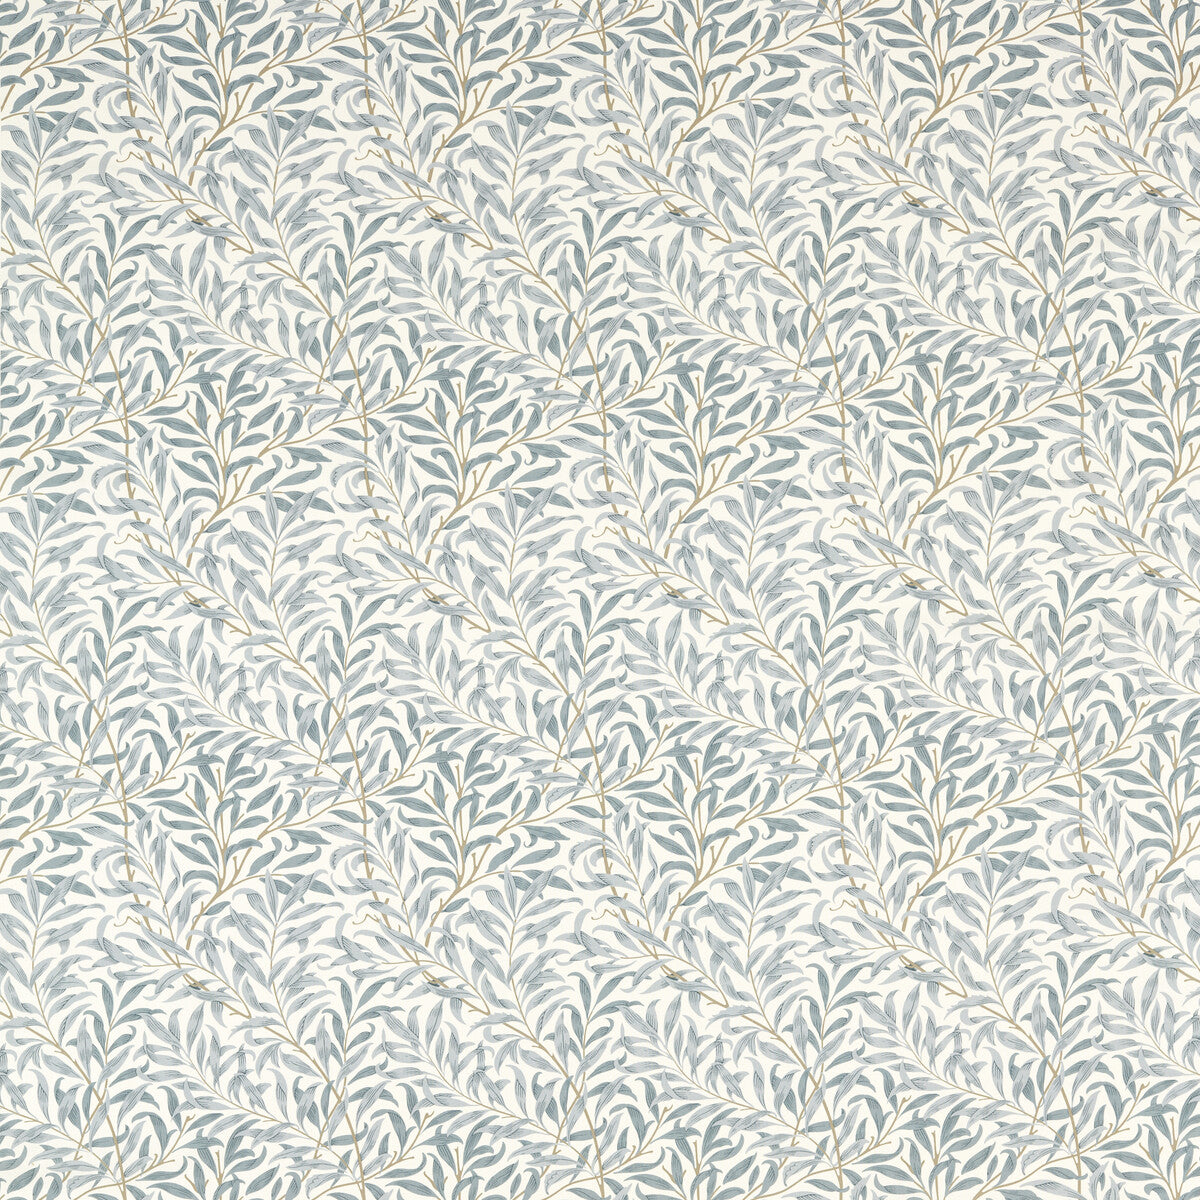 Willow Boughs fabric in mineral color - pattern F1679/02.CAC.0 - by Clarke And Clarke in the Clarke &amp; Clarke William Morris Designs collection